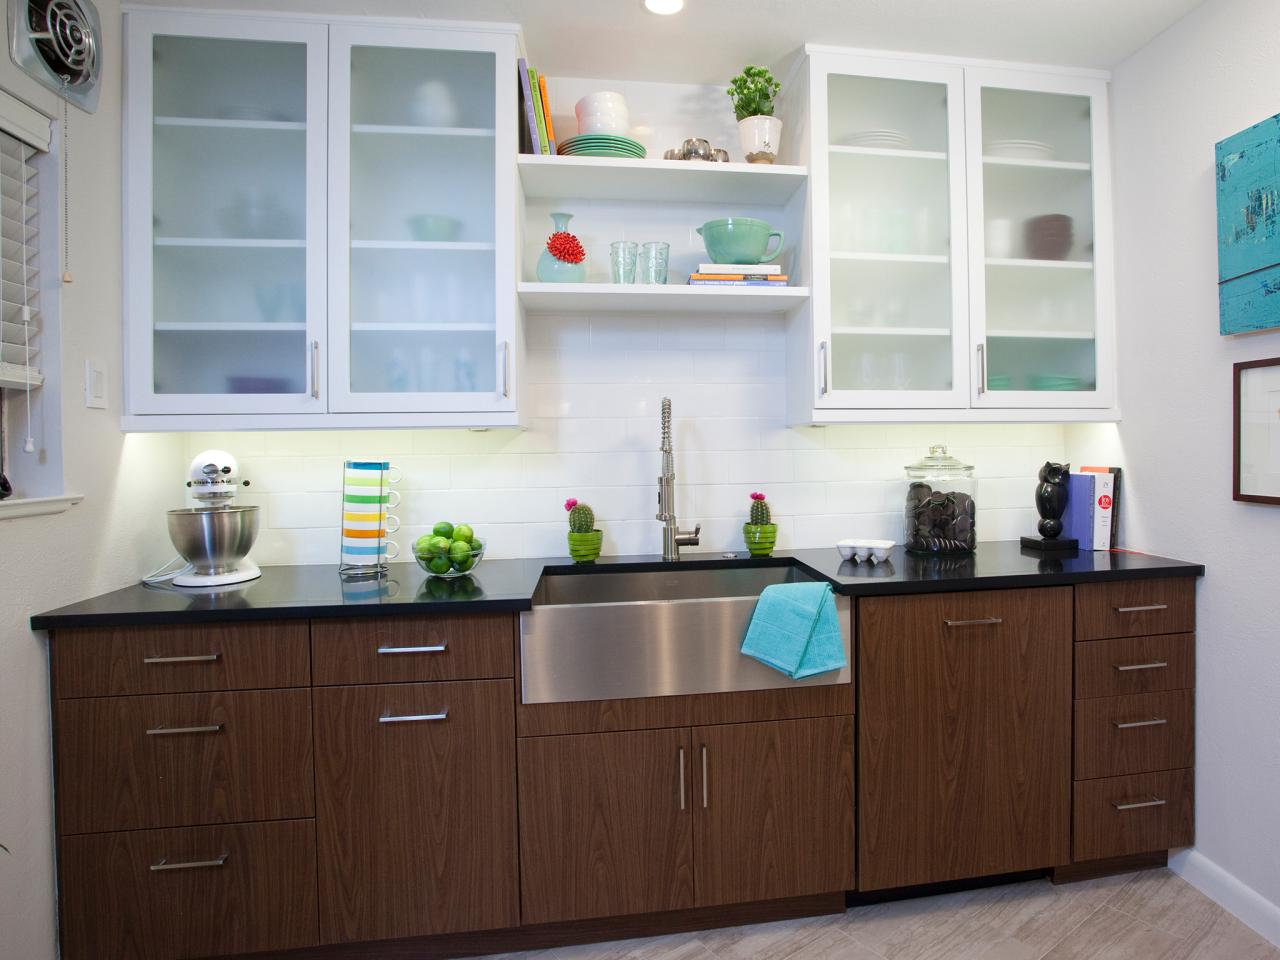 Cheap Kitchen Cabinets Pictures Ideas Tips From HGTV HGTV